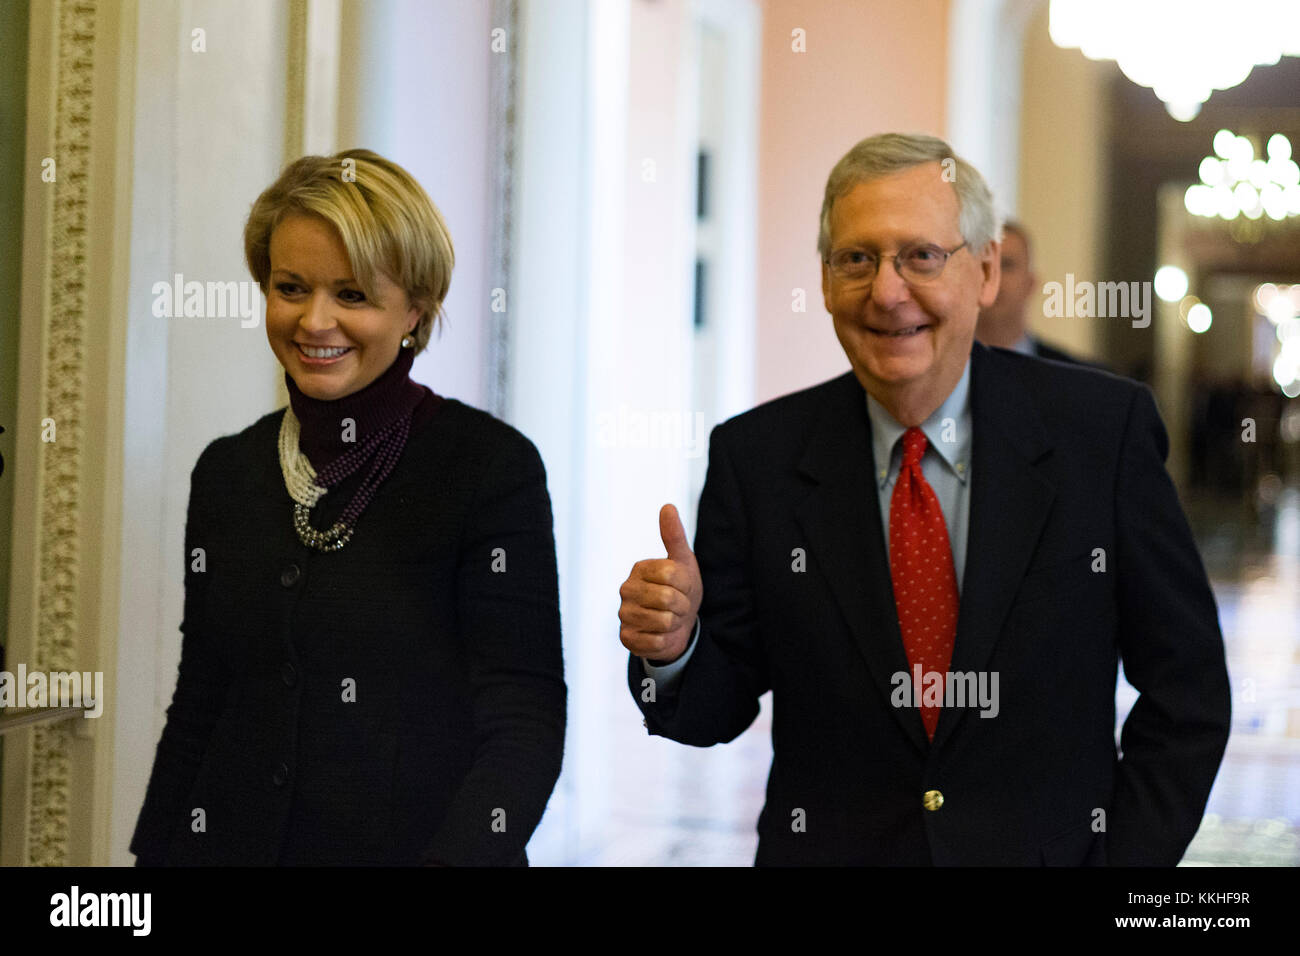 United States Senate Majority Leader Mitch McConnell (Republican of Kentucky) gives a thumbs up as he walks with a staffer from his office to the Senate chamber for a procedural vote to move forward with voting on the Republican proposed tax reform bill at the United States Capitol in Washington, DC on Friday, December 1, 2017. Credit: Alex Edelman/CNP /MediaPunch Stock Photo